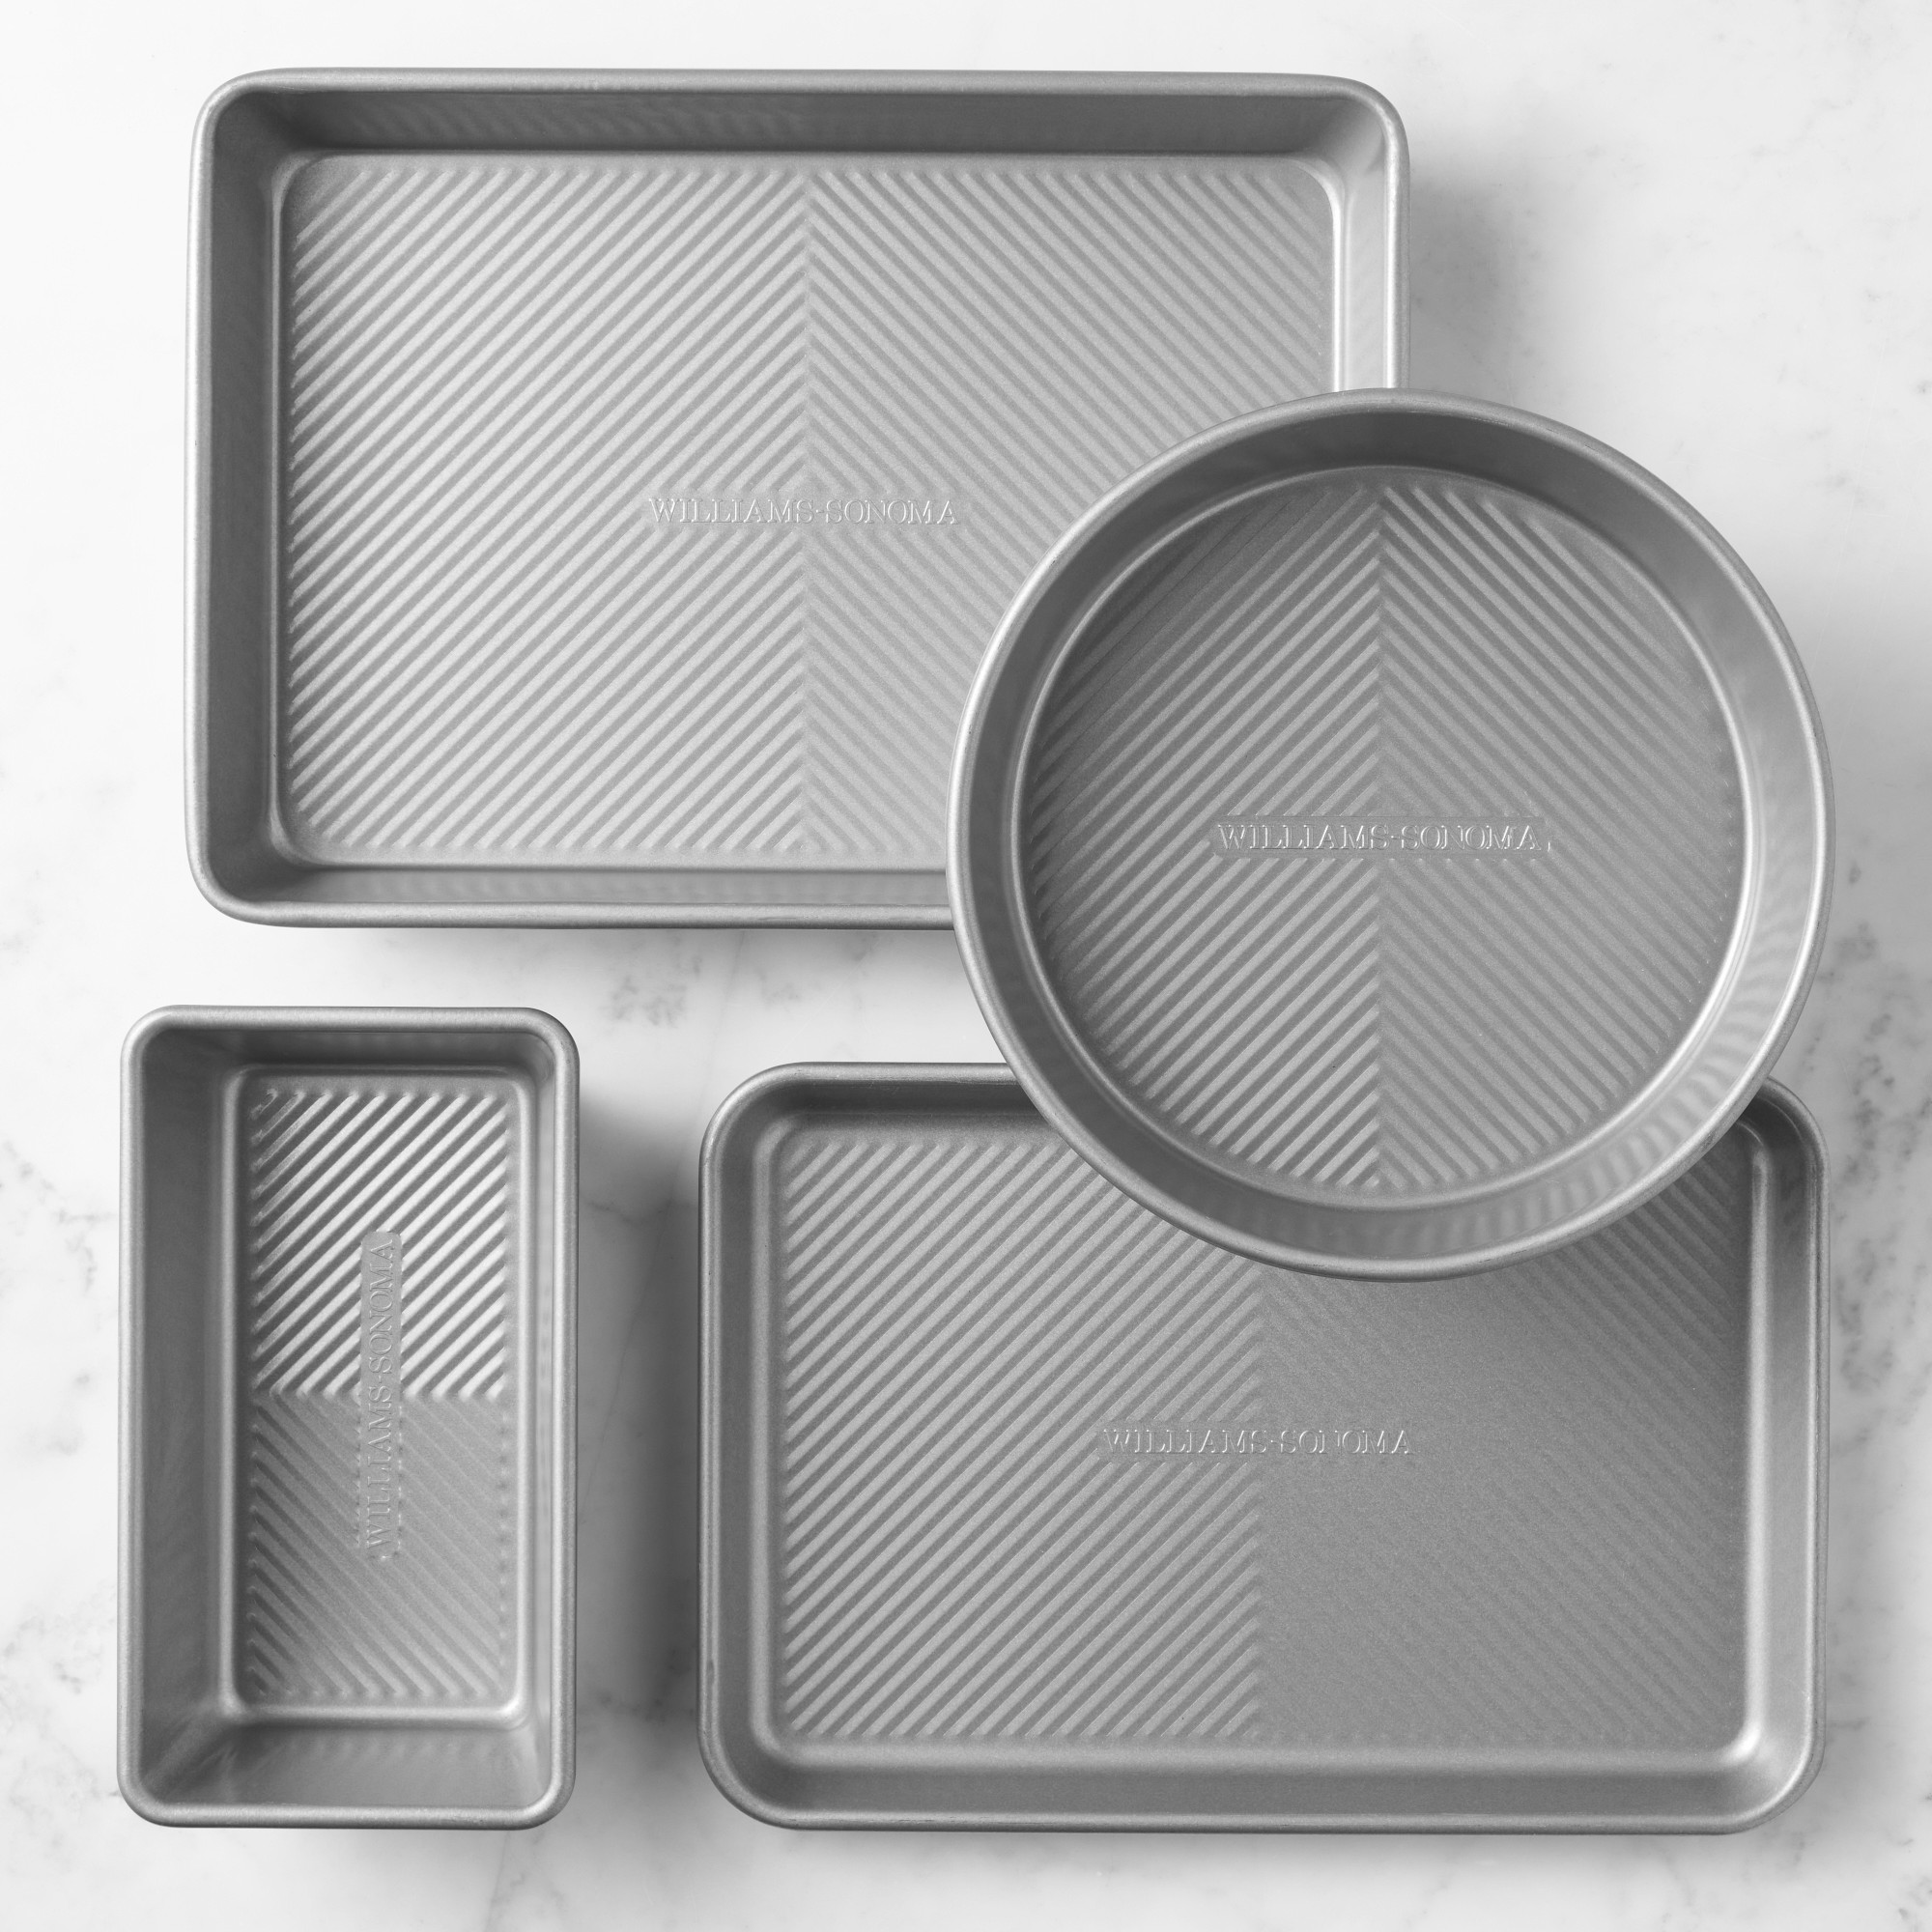 Williams Sonoma Cleartouch Nonstick Bakeware Essentials, Set of 4